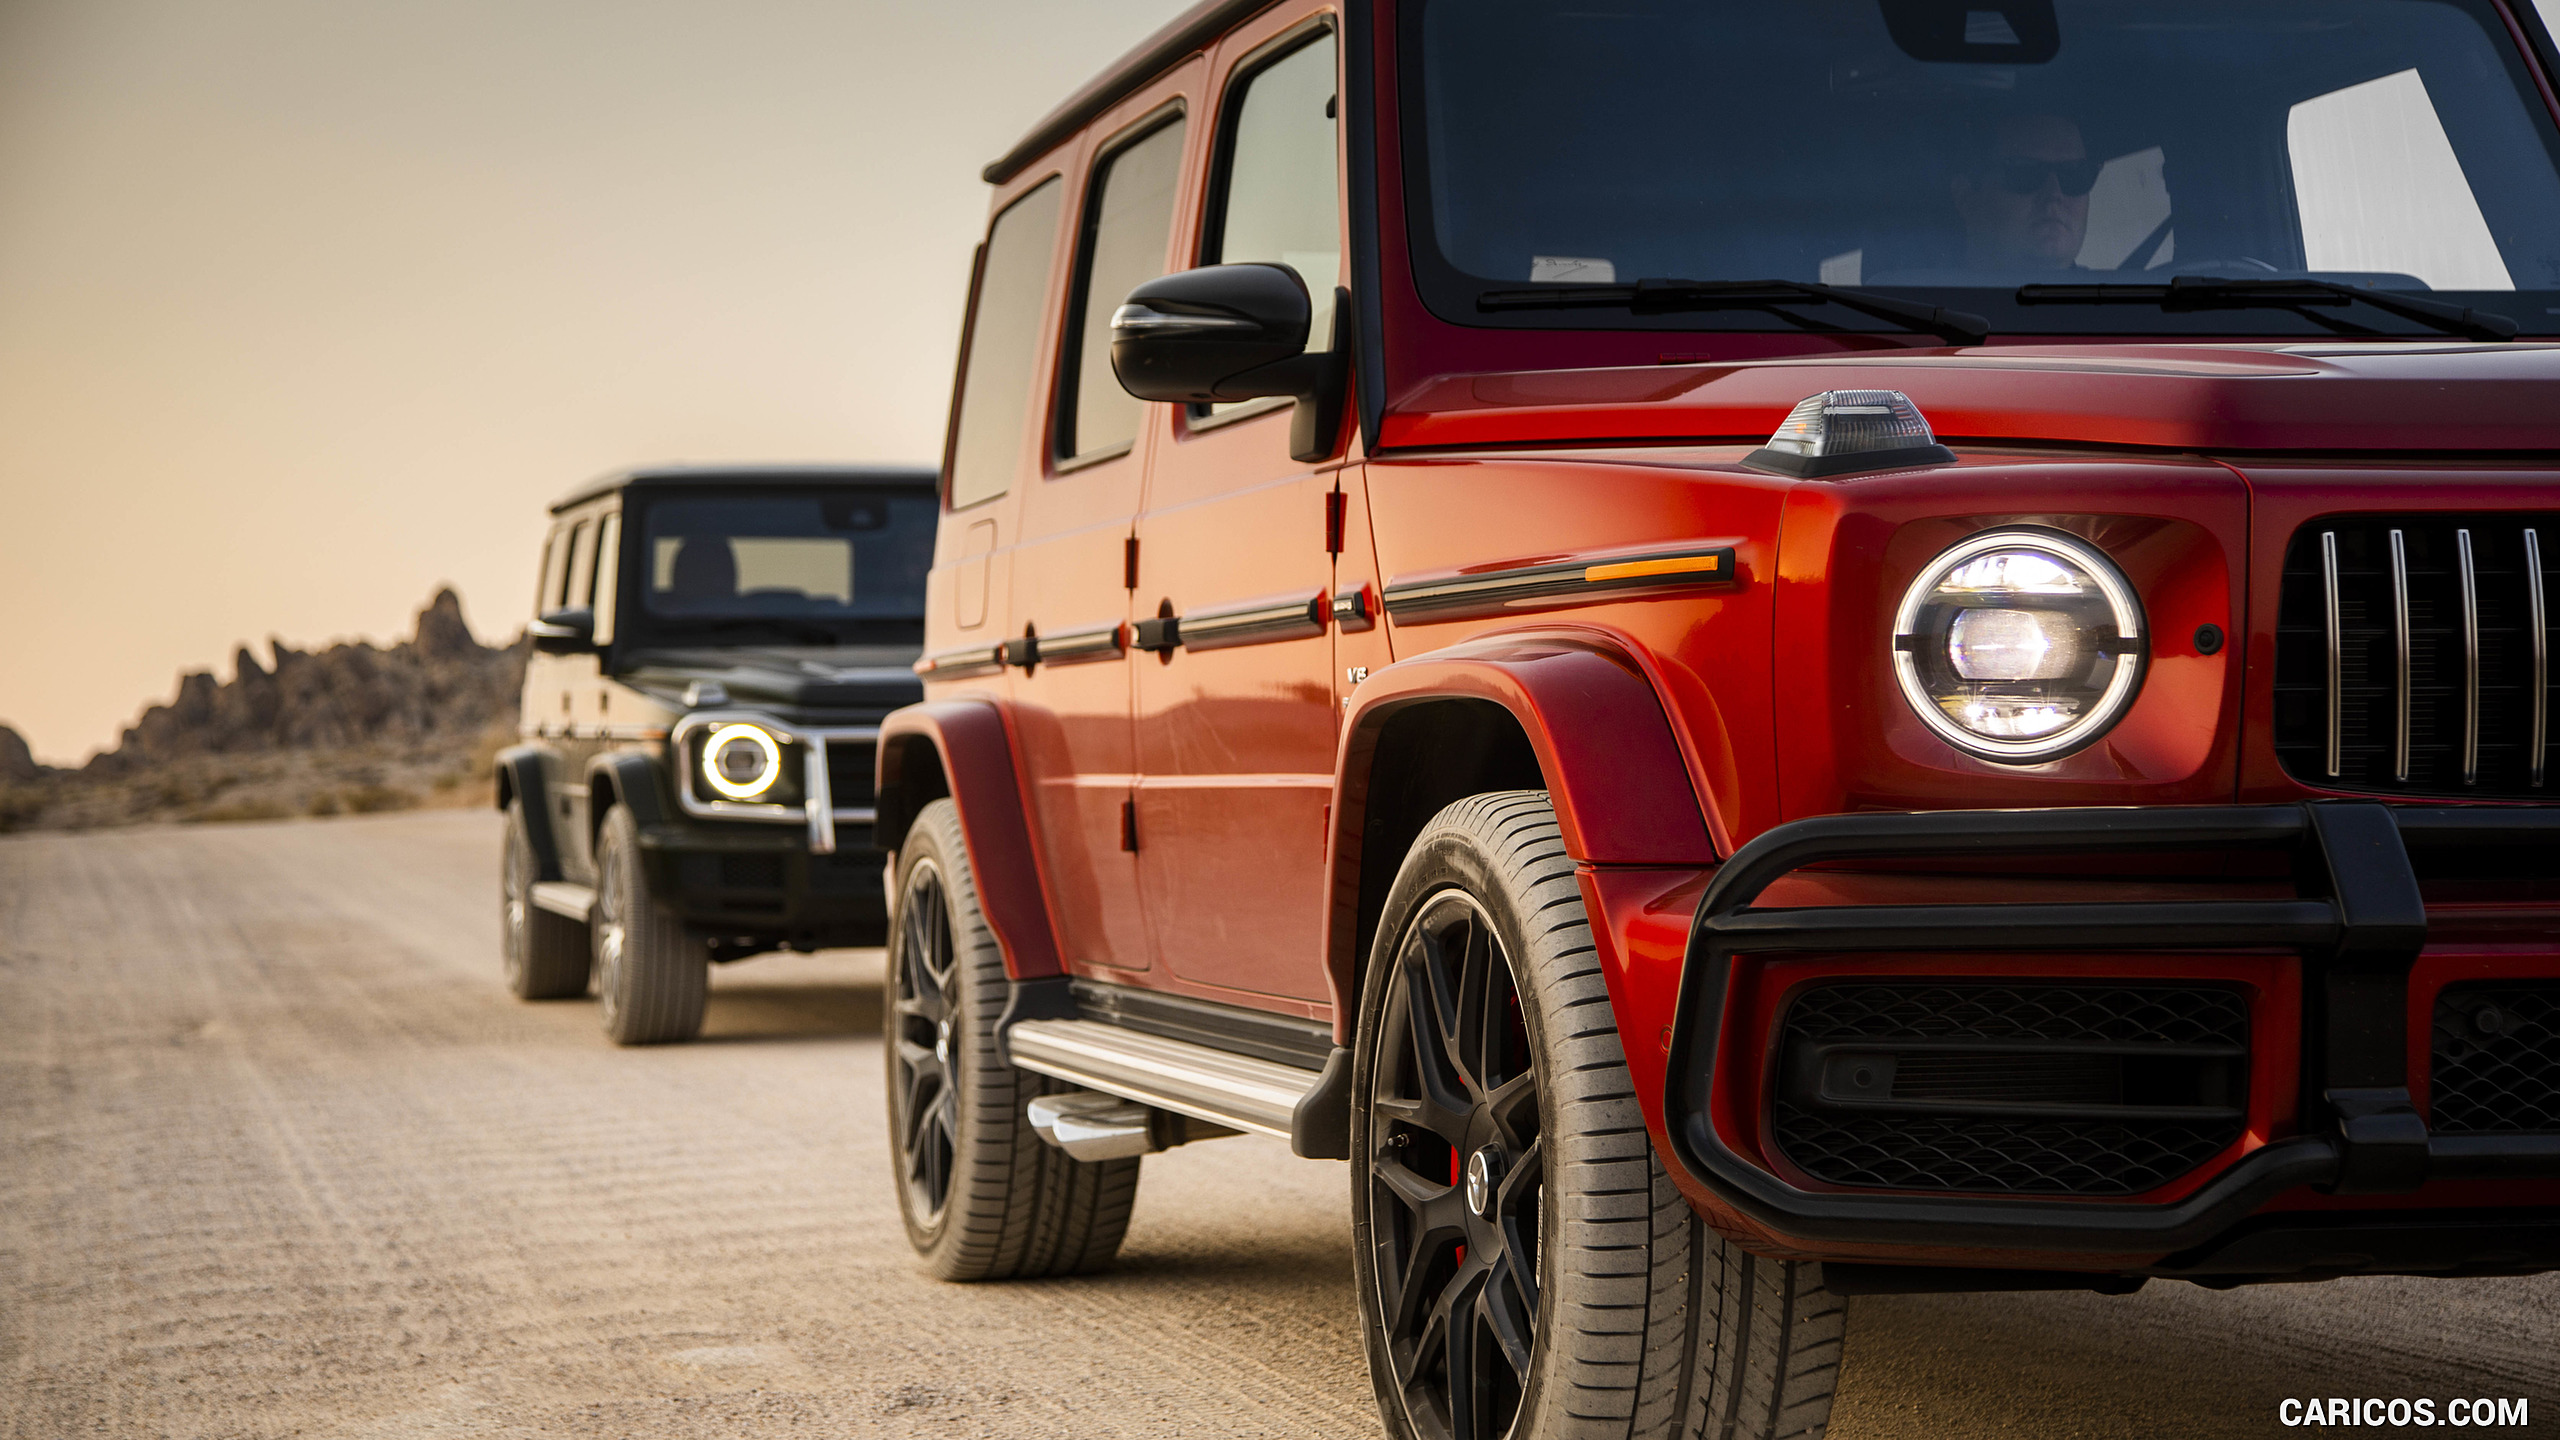 2019 Mercedes-AMG G63 (U.S.-Spec) and 2019 G550, #353 of 452